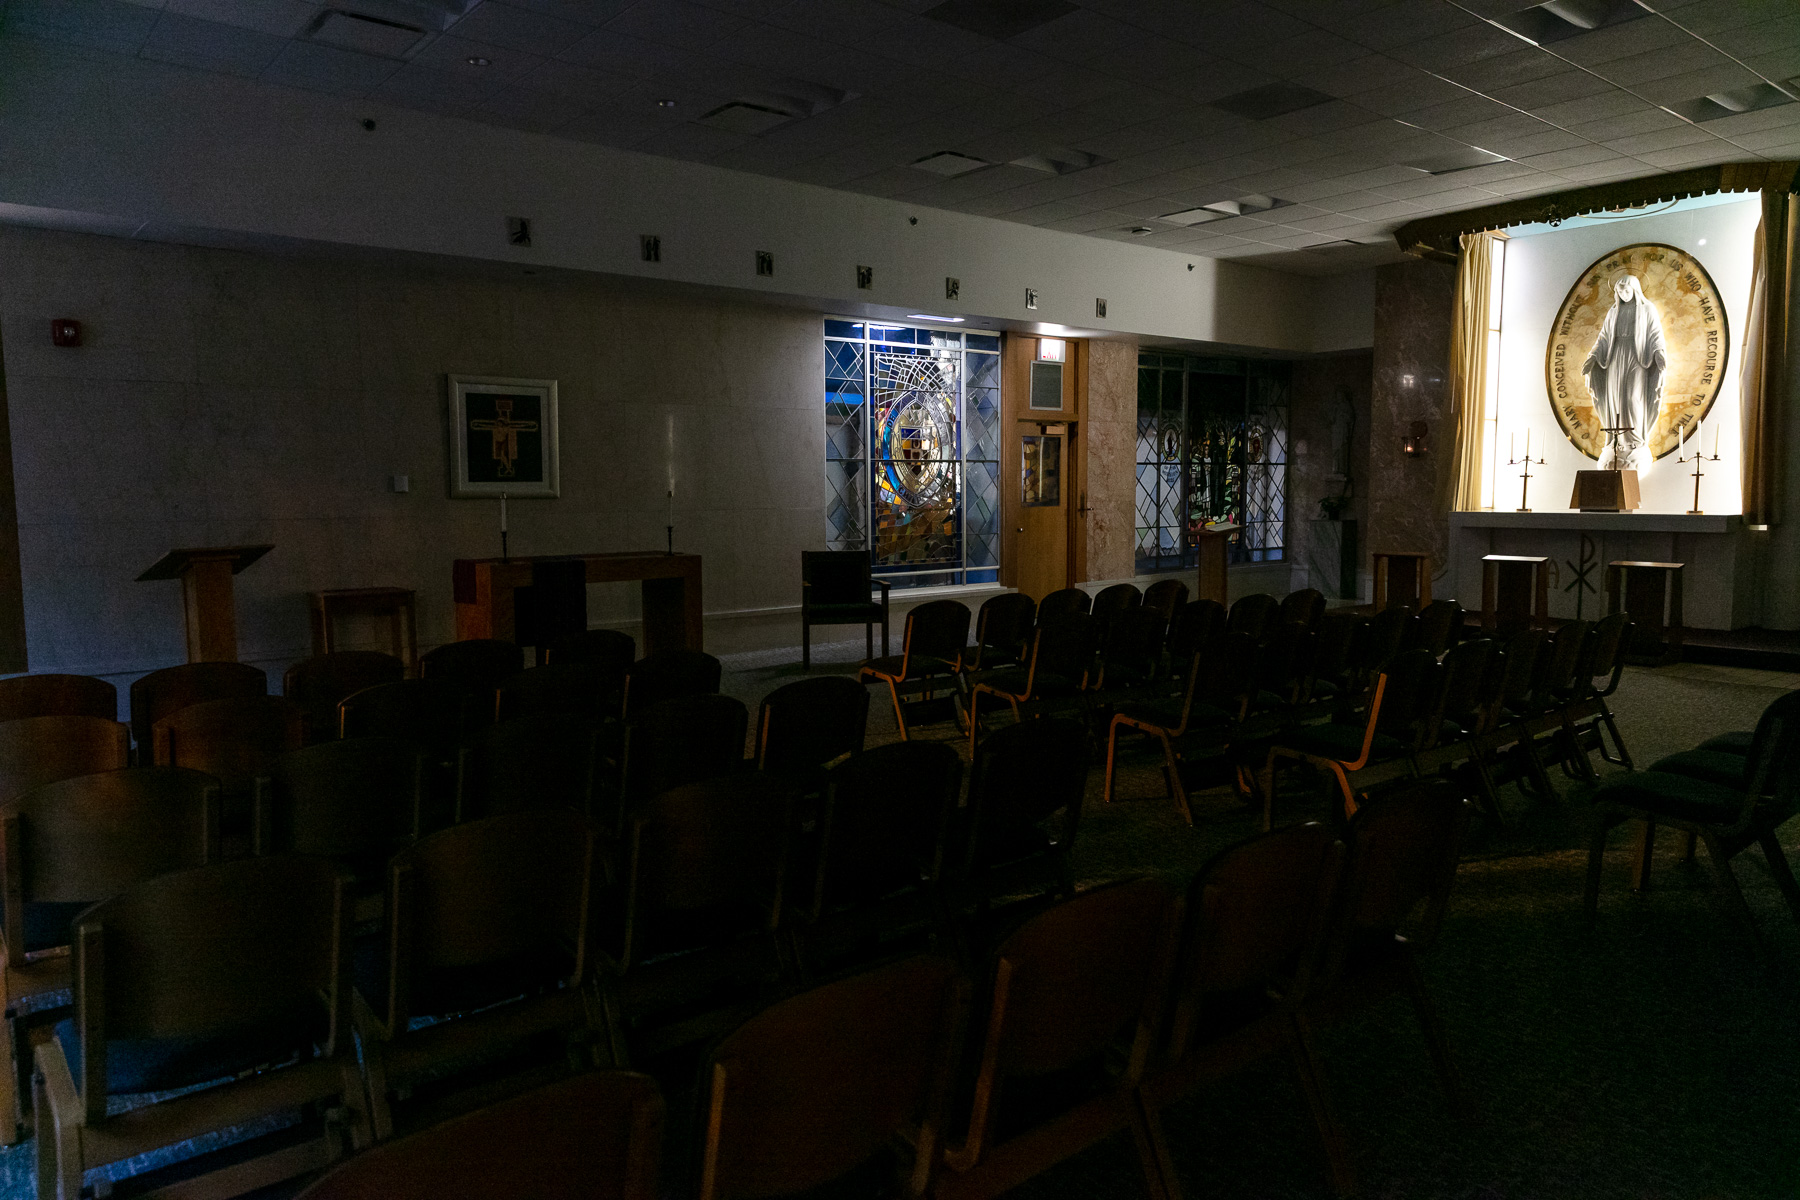 Our Lady of the Miraculous Medal Chapel, in the Lewis Center, on DePaul’s Loop Campus, is closed until further notice, but prayer and meditation continue through virtual communities. (DePaul University/Randall Spriggs)